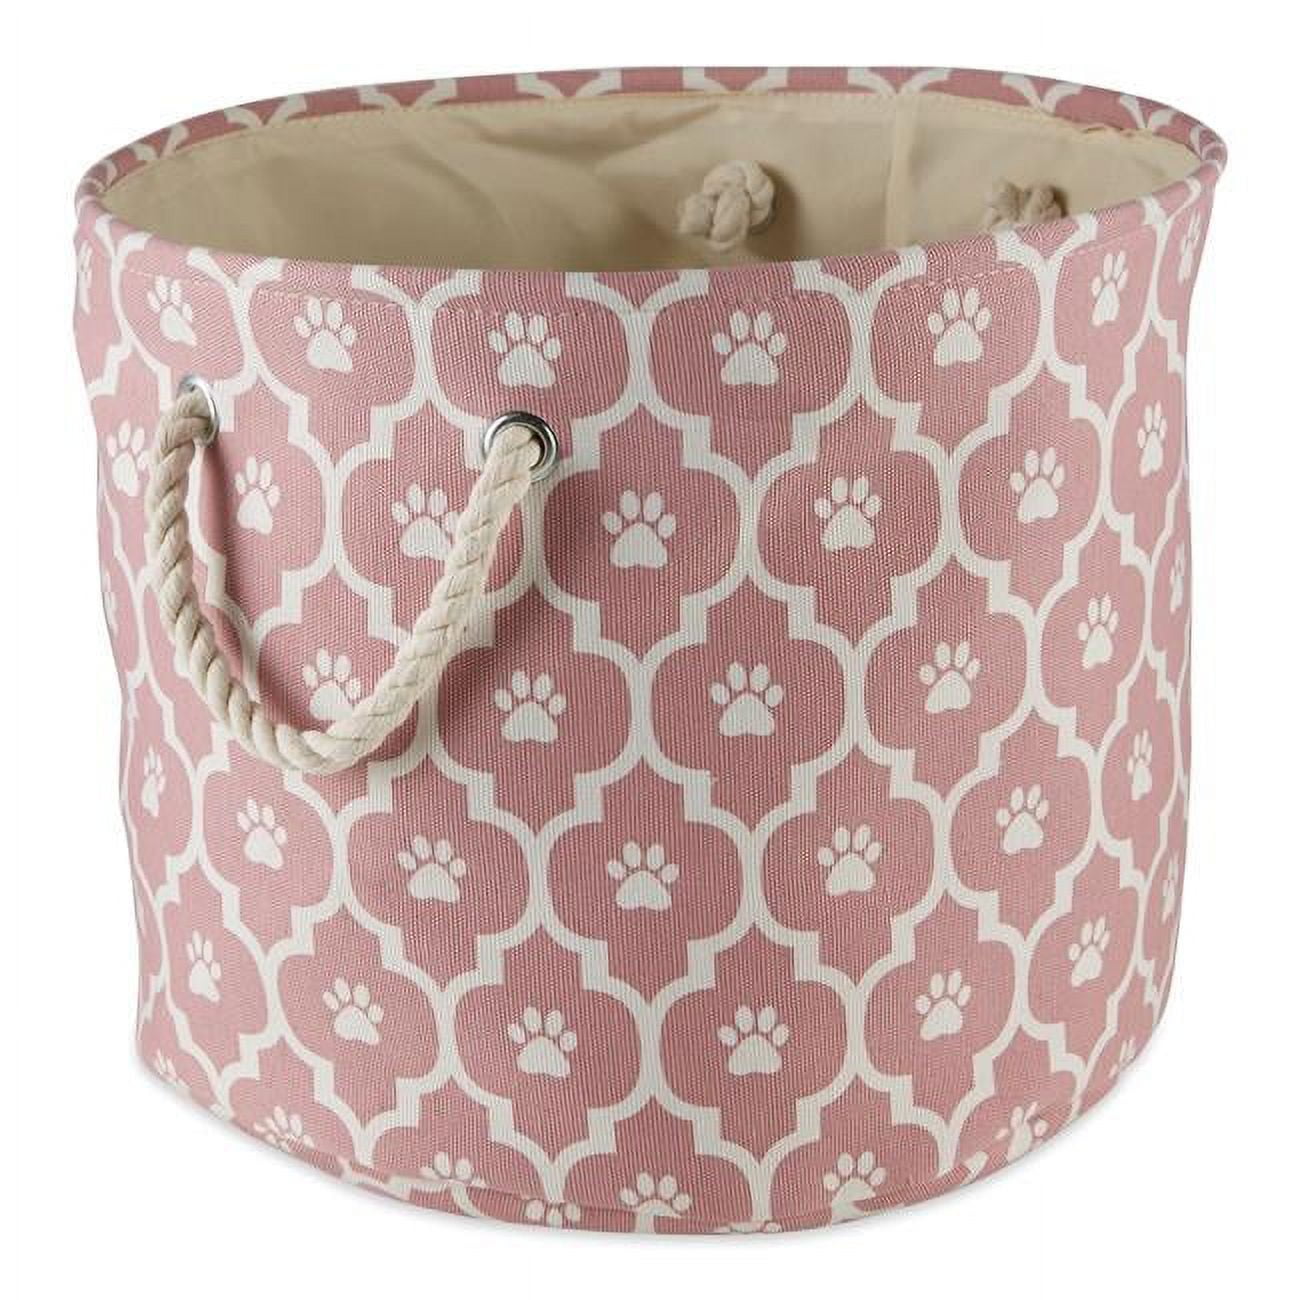 Picture of Design Imports CAMZ12530 Lattice Paw Round Polyester Pet Bin, Rose - Small